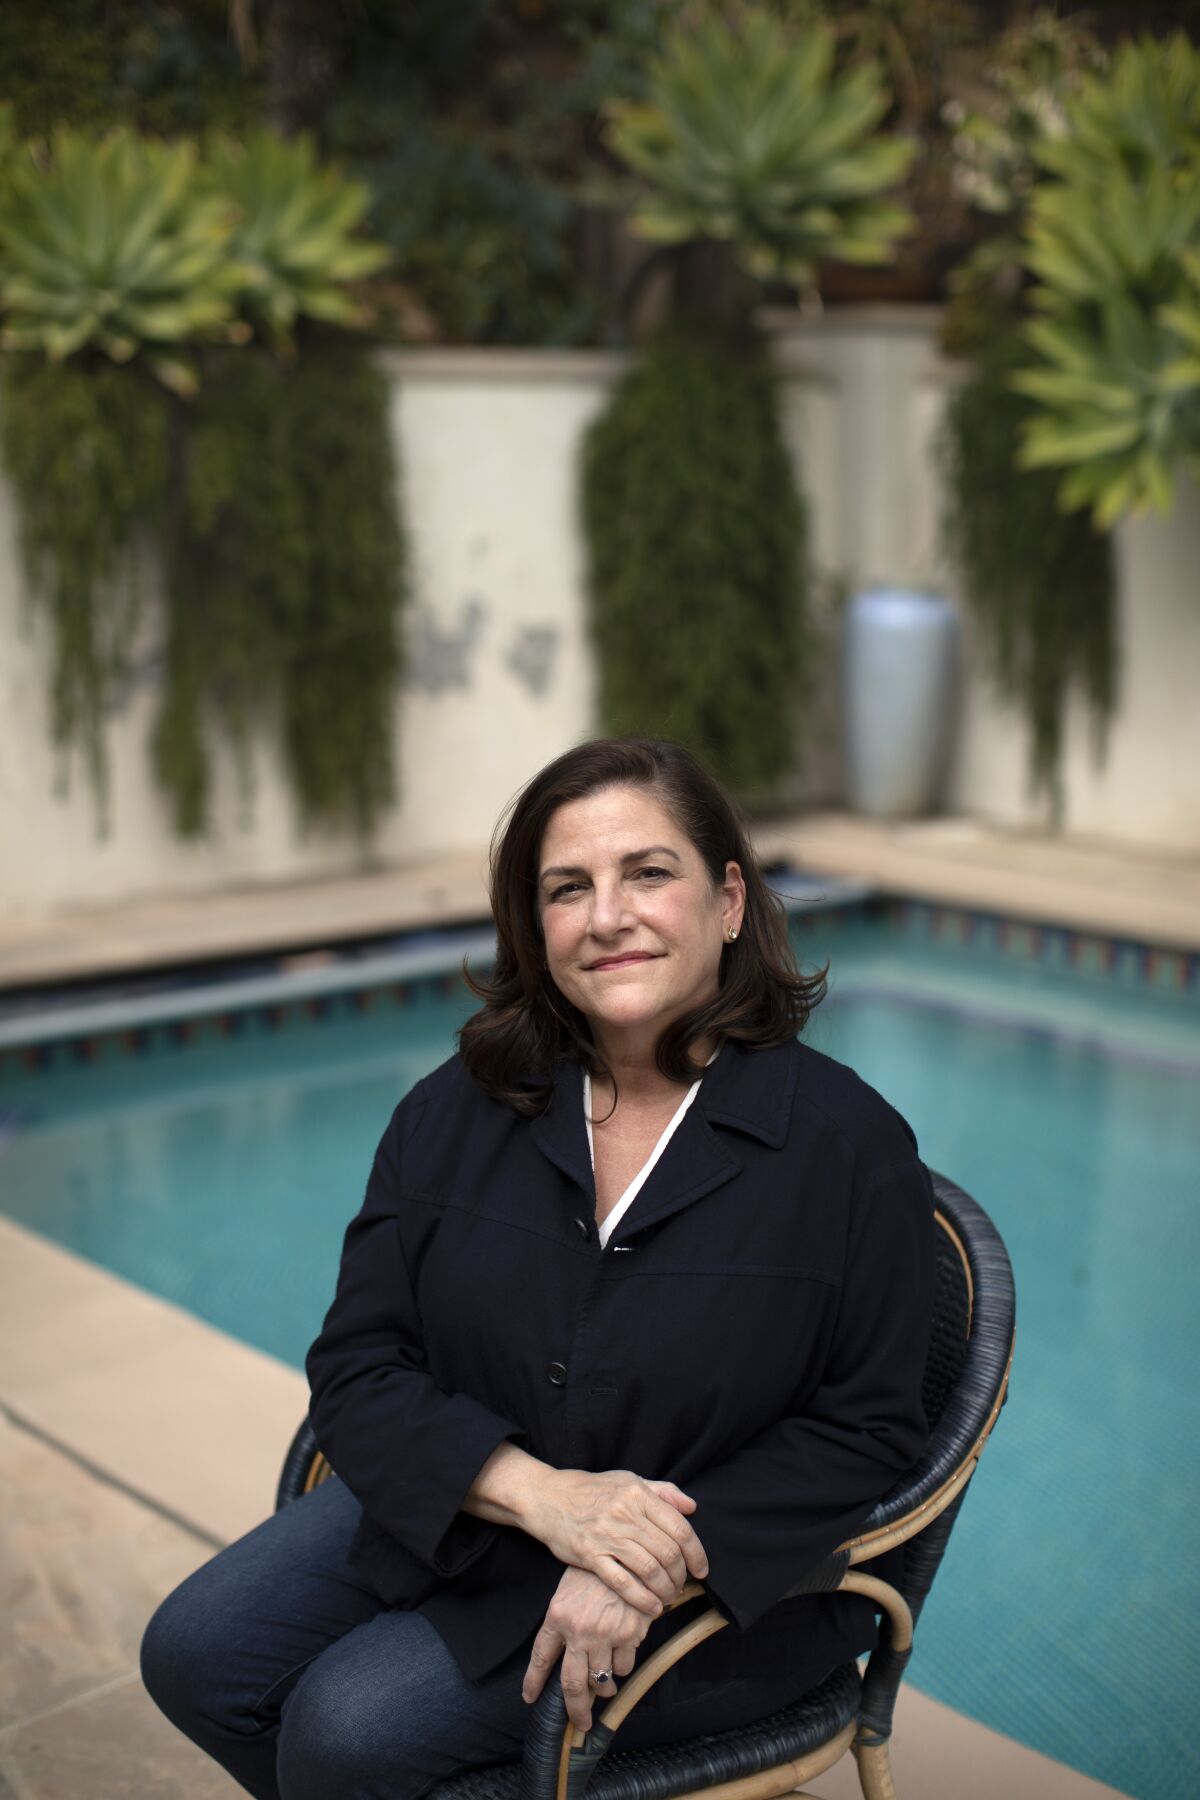 Author Cynthia D'Aprix Sweeney sits beside the swimming pool at her family's Los Feliz home.